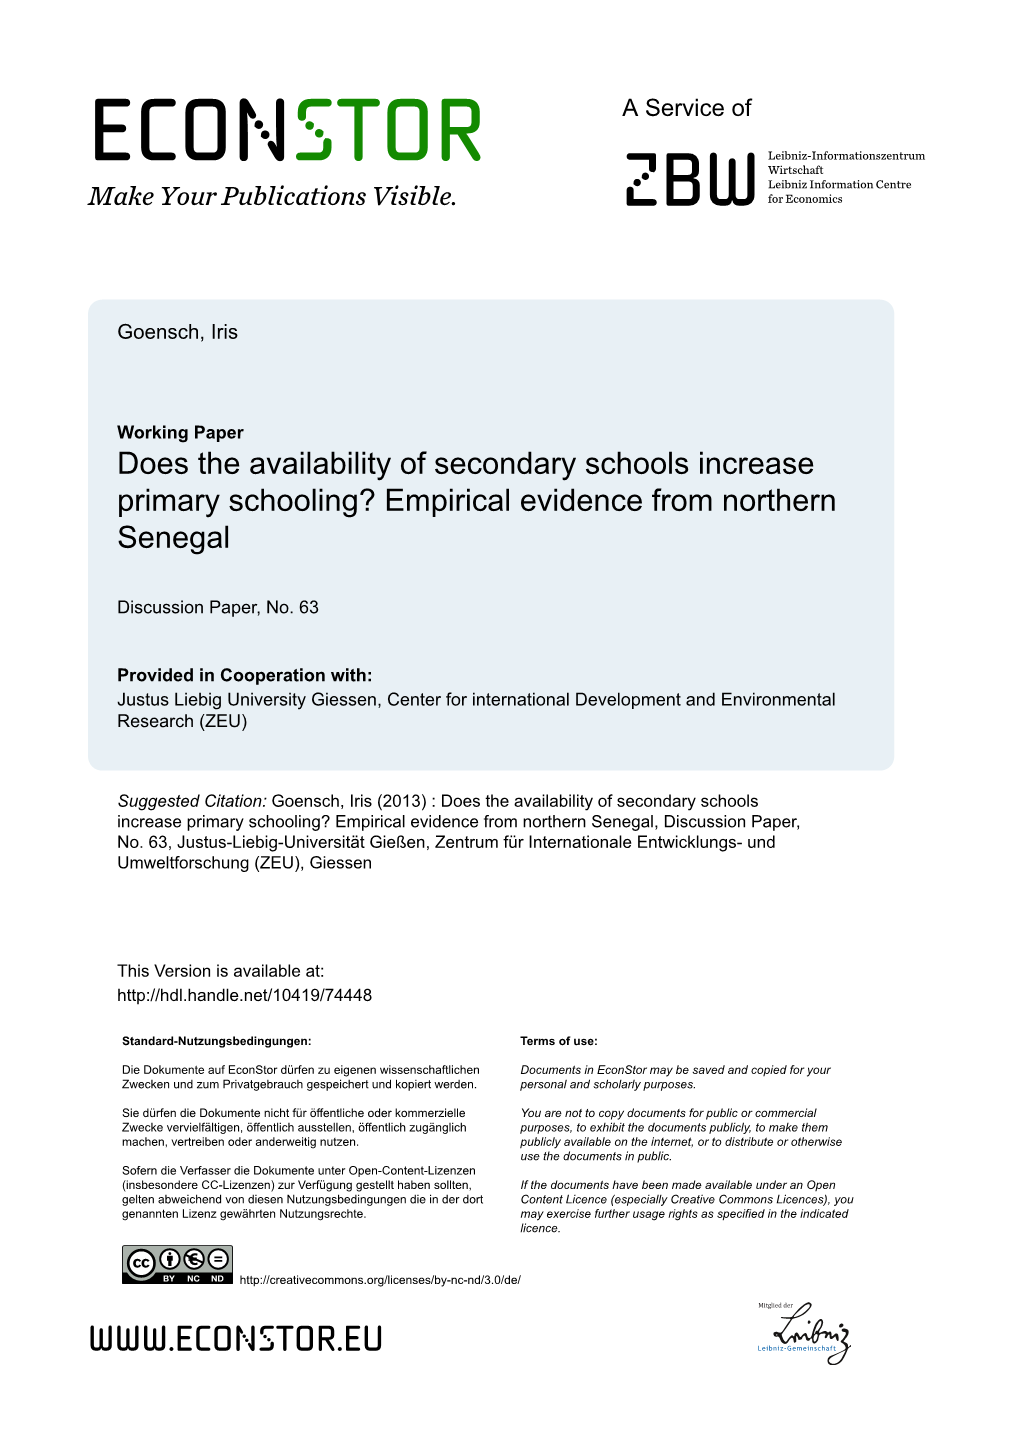 Does the Availability of Secondary Schools Increase Primary Schooling? Empirical Evidence from Northern Senegal